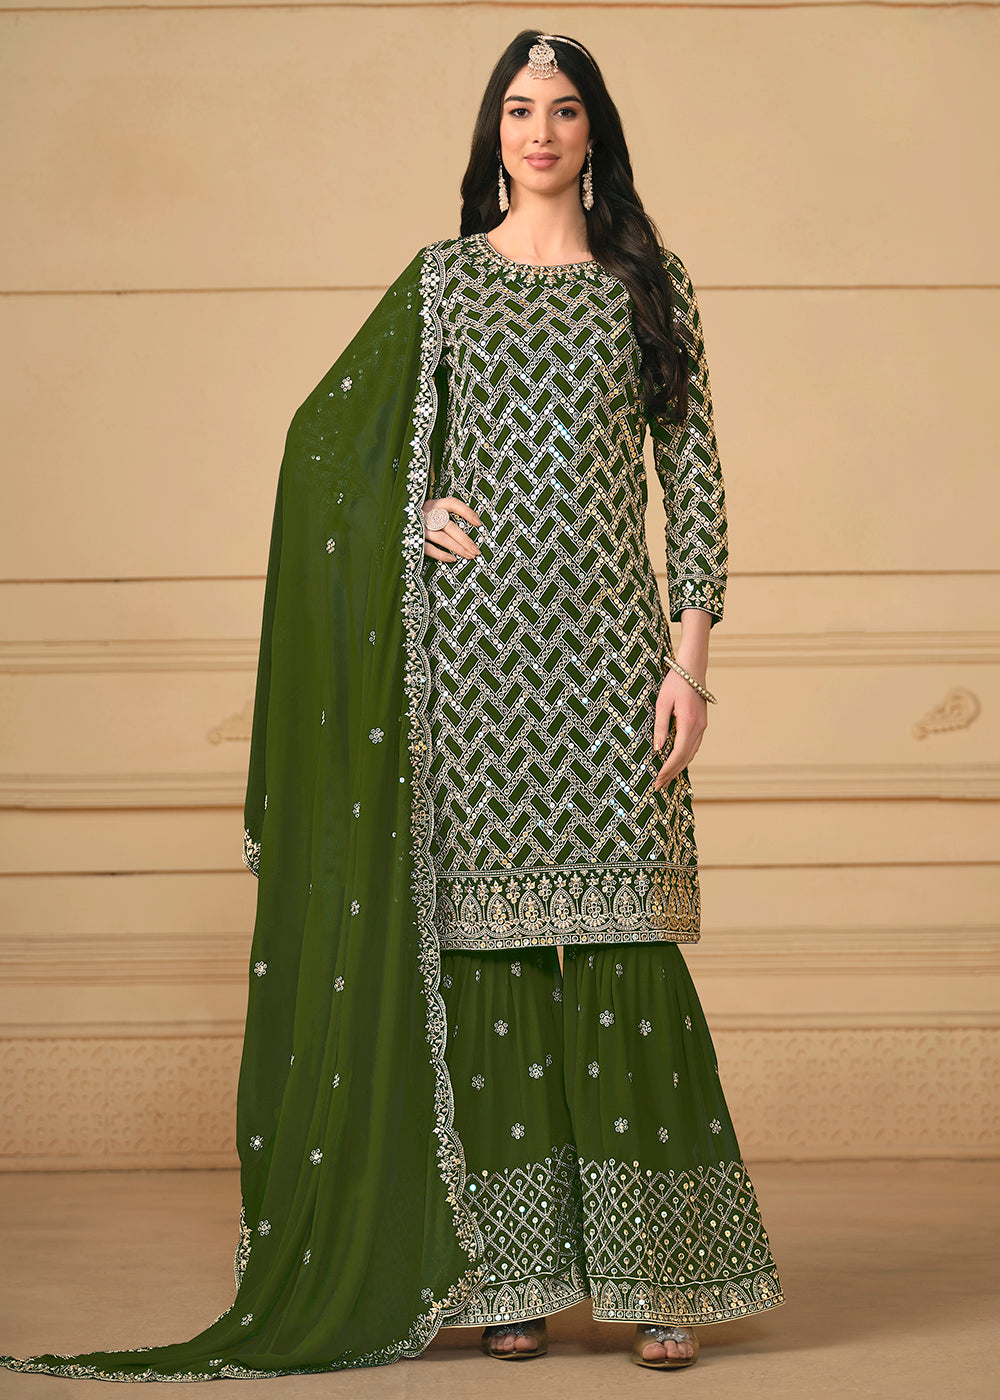 Shop Now Georgette Green Embroidered Gharara Style Suit Online at Empress Clothing in USA, UK, Canada, Italy & Worldwide.